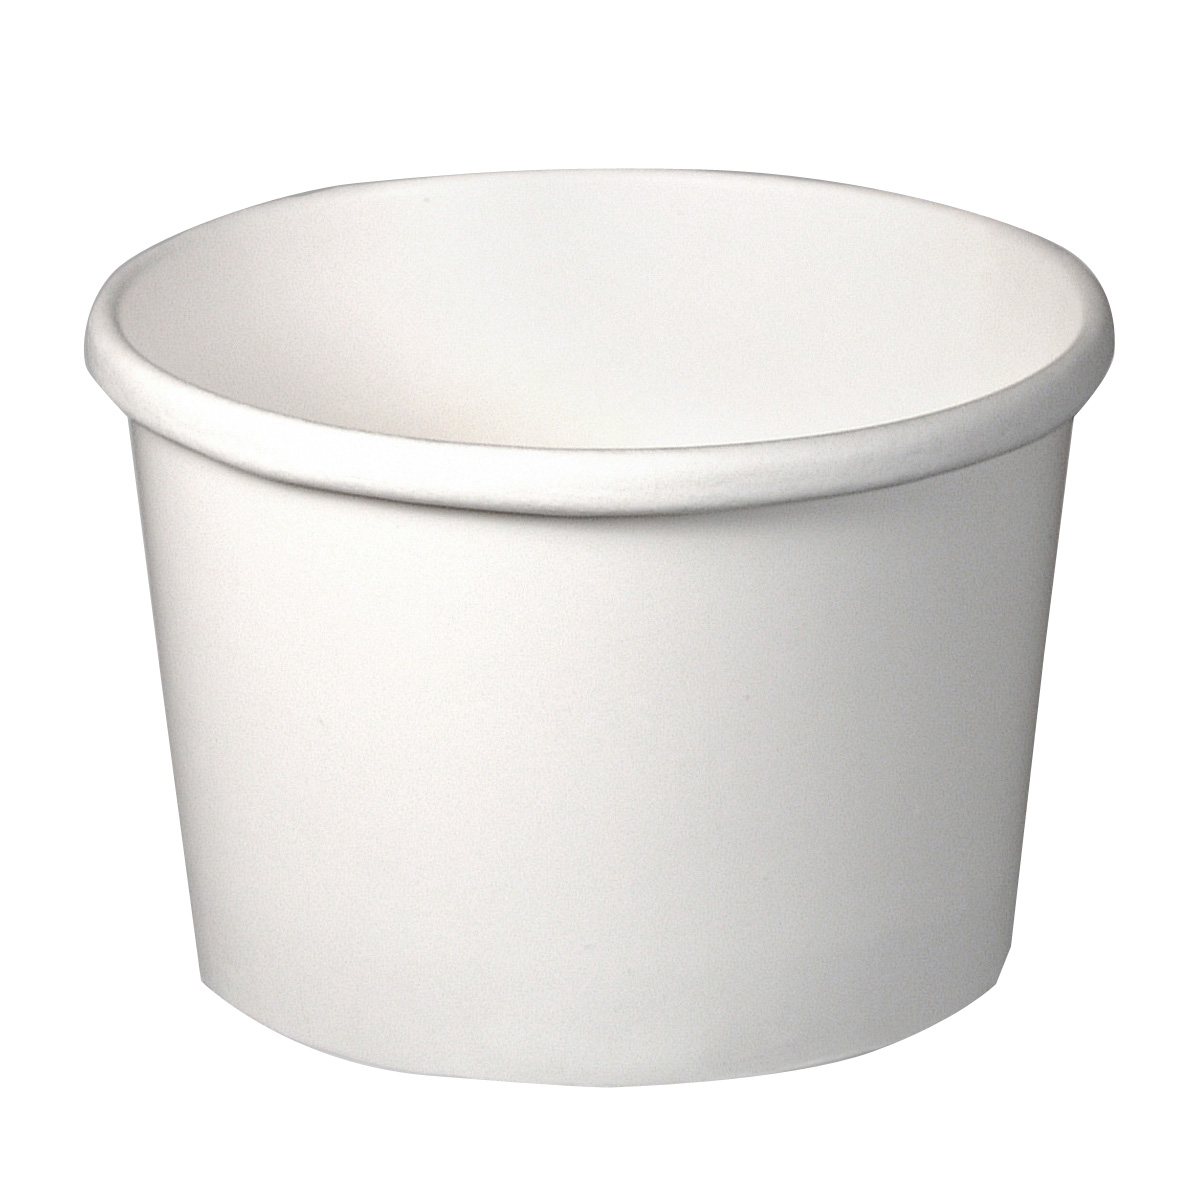 8OZ HEAVY DUTY CONTAINER
WHITE 20/25